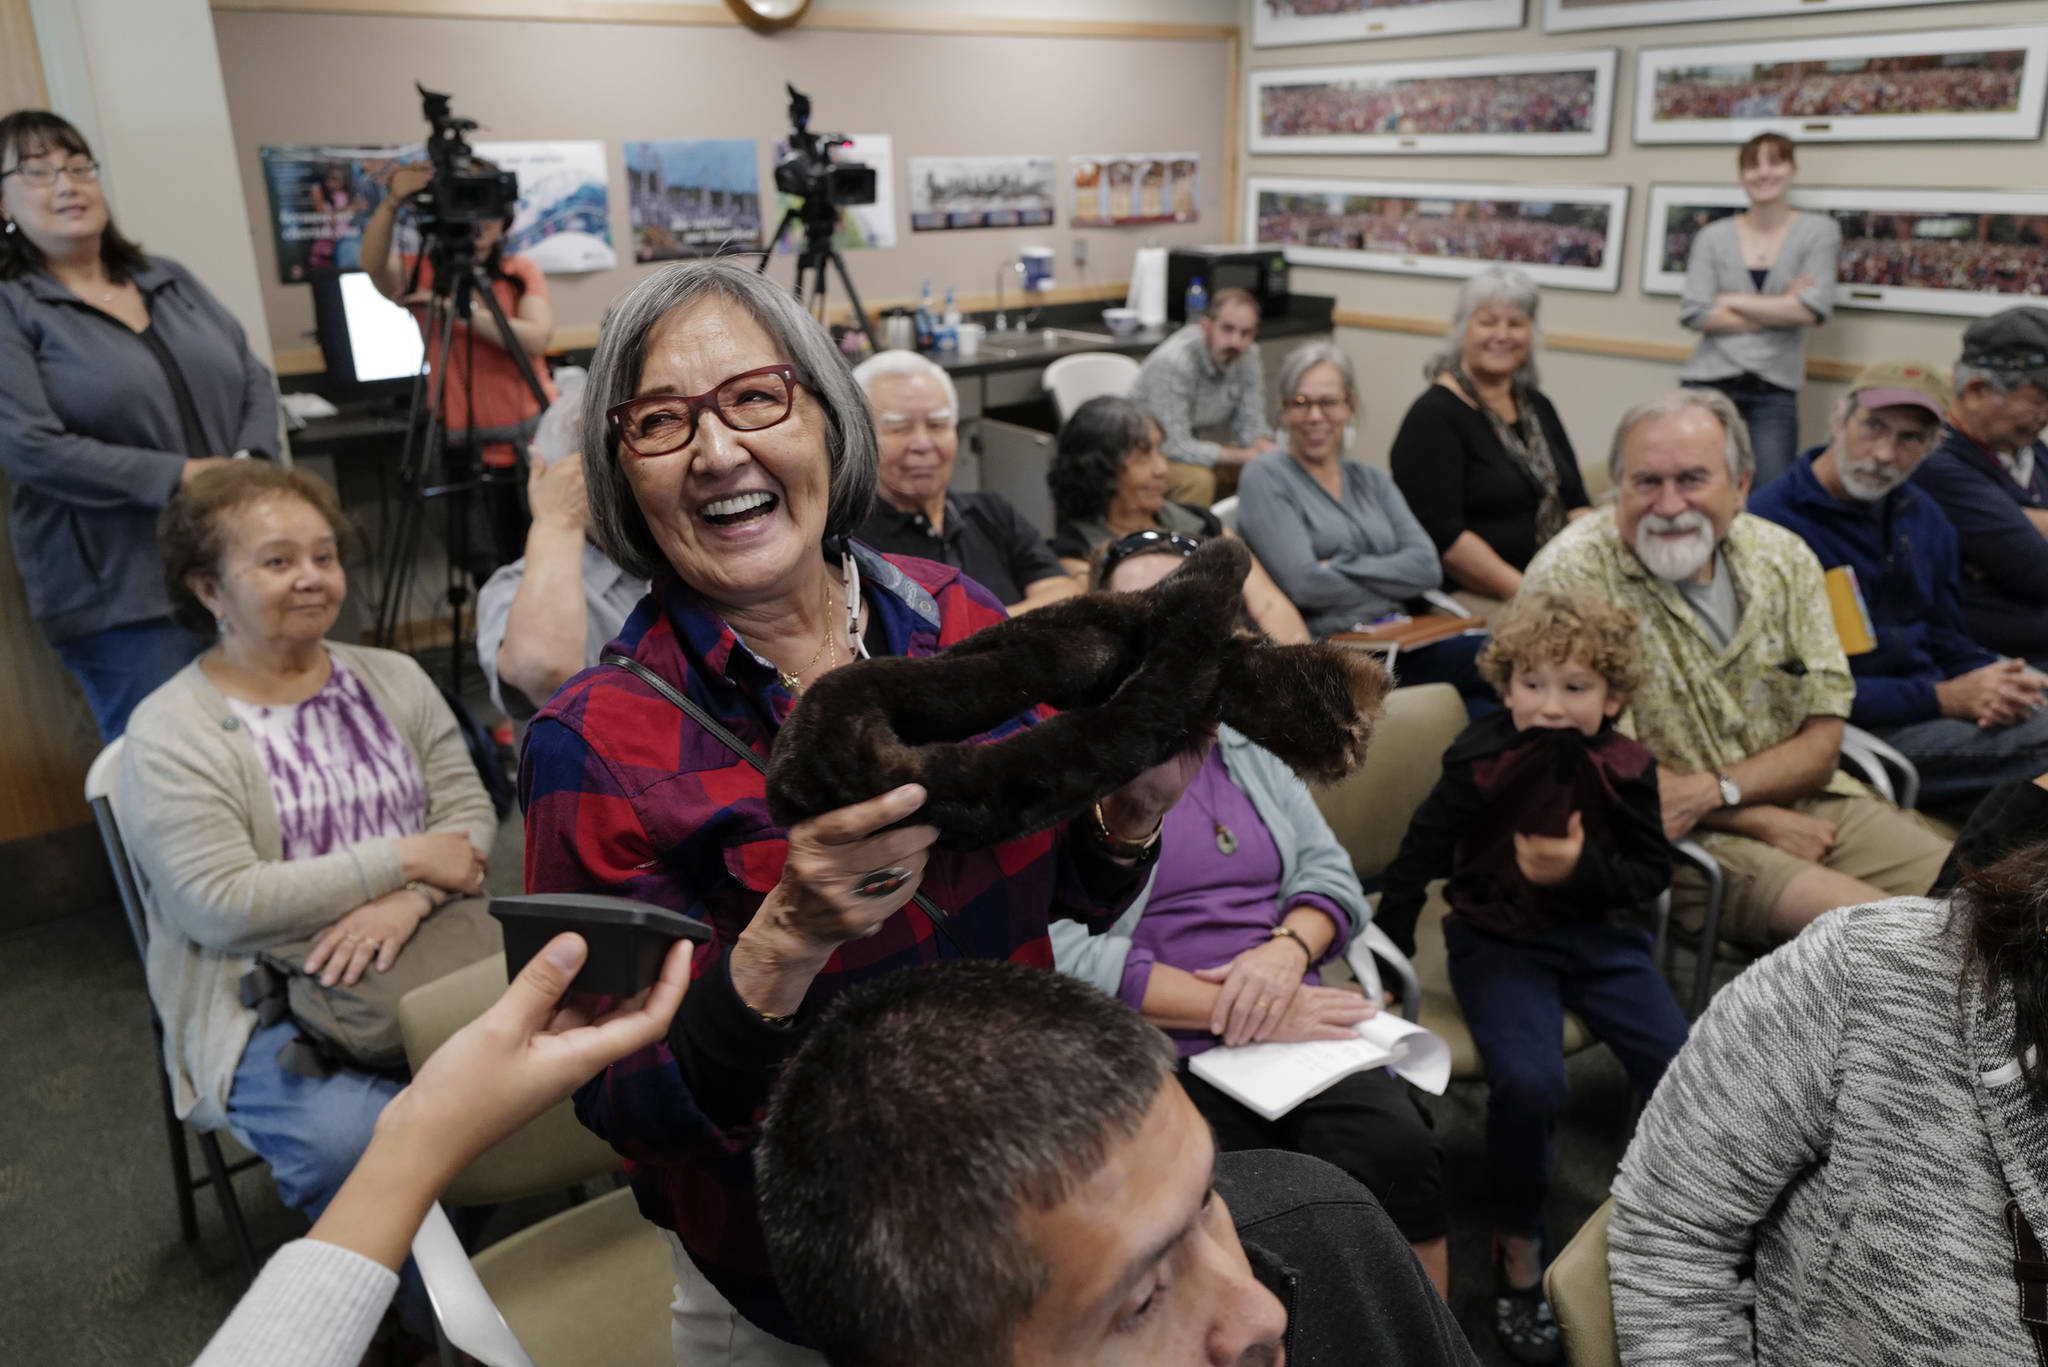 Rosita Worl, president of Sealaska Heritage Institute, holds up sea otter fur during a presentation about Tlingit relationships with sea otters in August. SHI is sponsoring a machine sewing class that will include sea otter hide. (Michael Penn | Juneau Empire File)